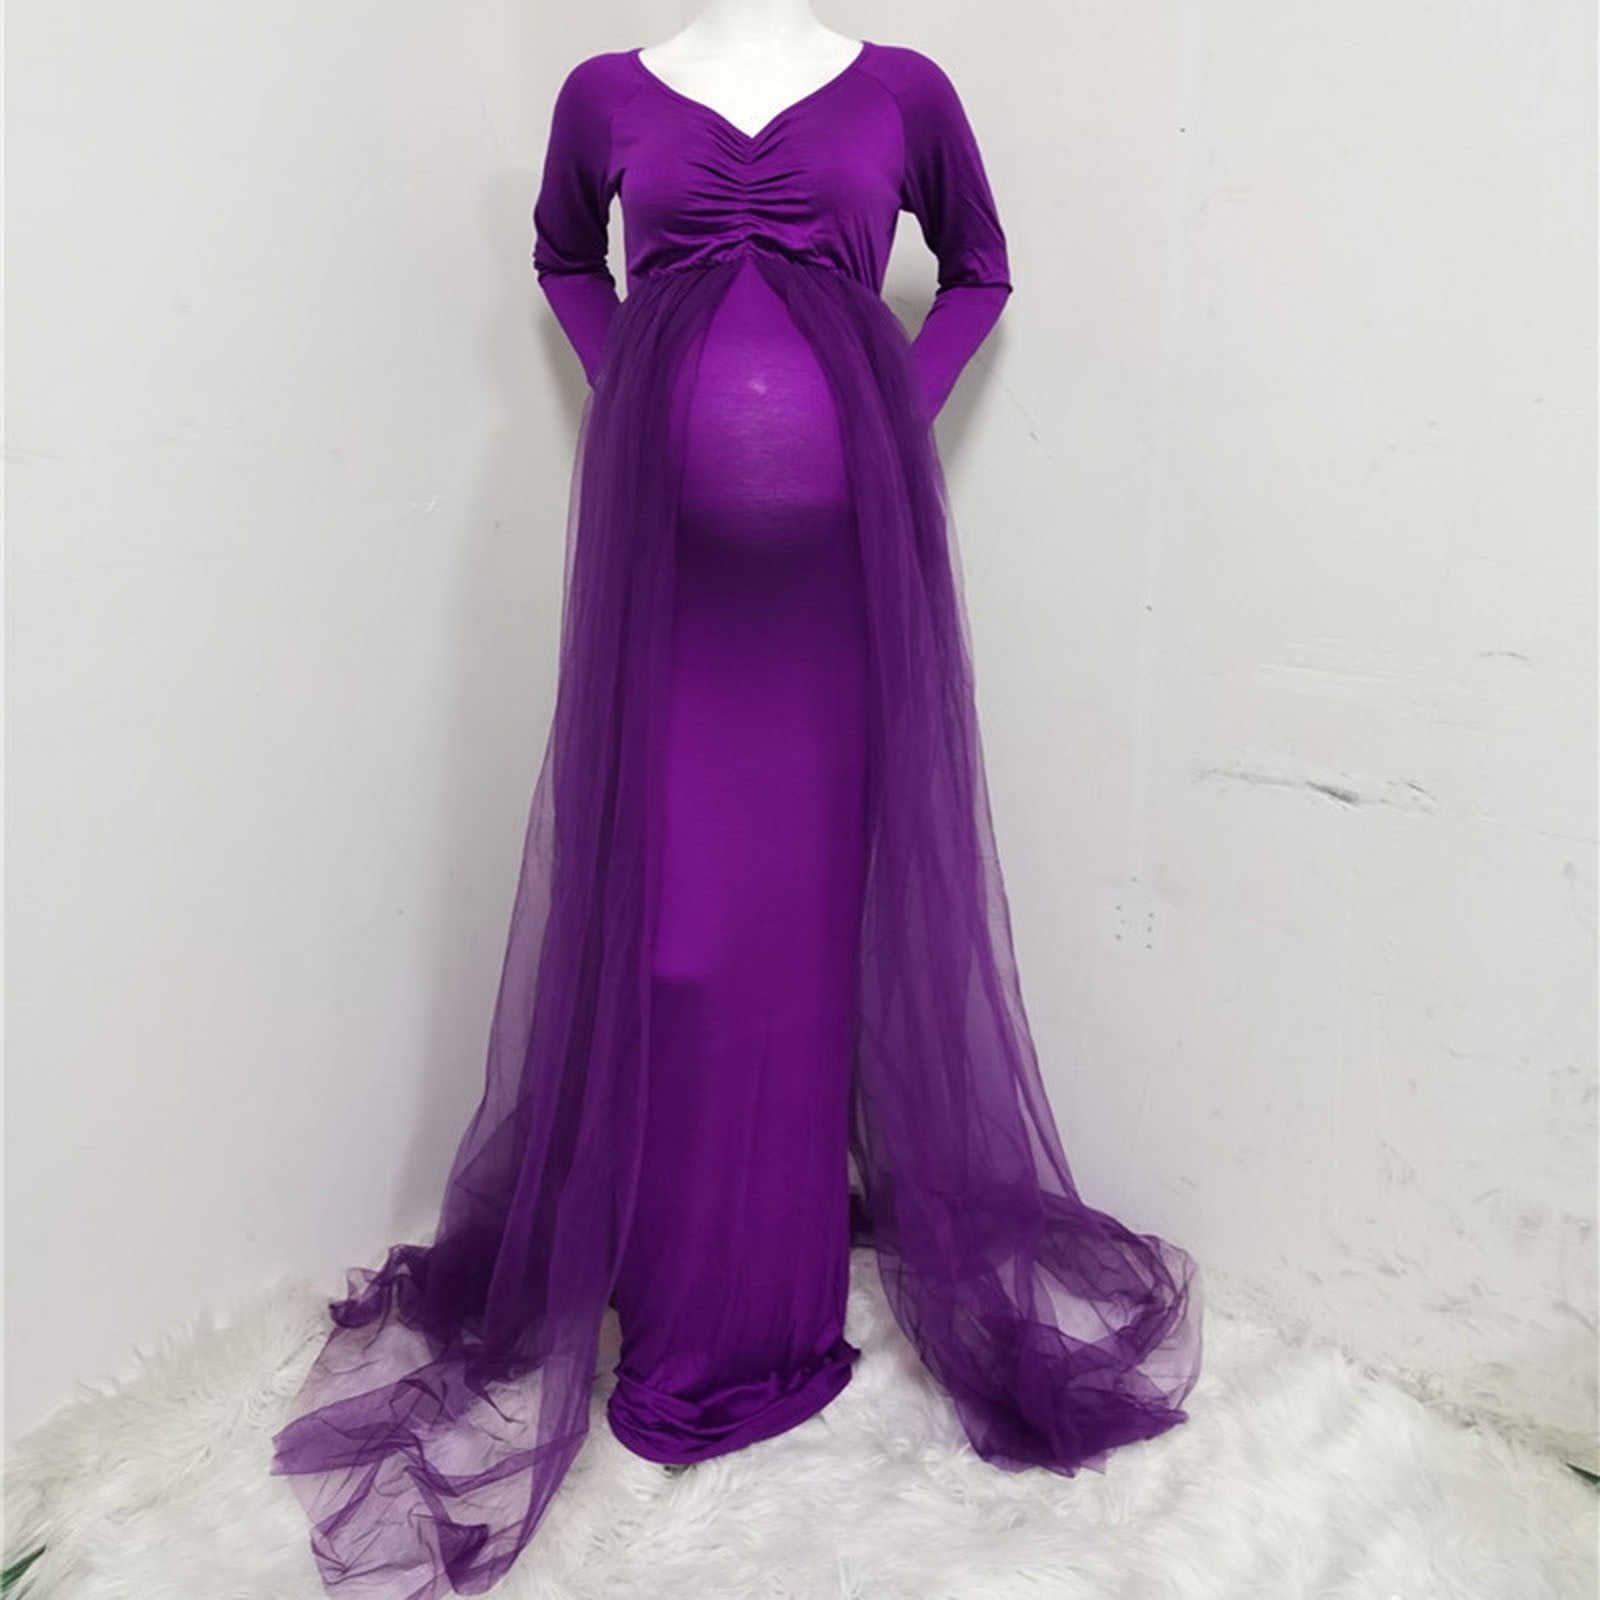 Vedolay Spring Maternity Dress Women Ruched Floral Lace Photography Prop Maxi Fancy Wedding Pregnancy Gown Baby Shower Photoshoot Purple M fbebf23e 6a9d 4751 bb9c e737ef140958.284a3b8c941b64b97b4b845e621a4546